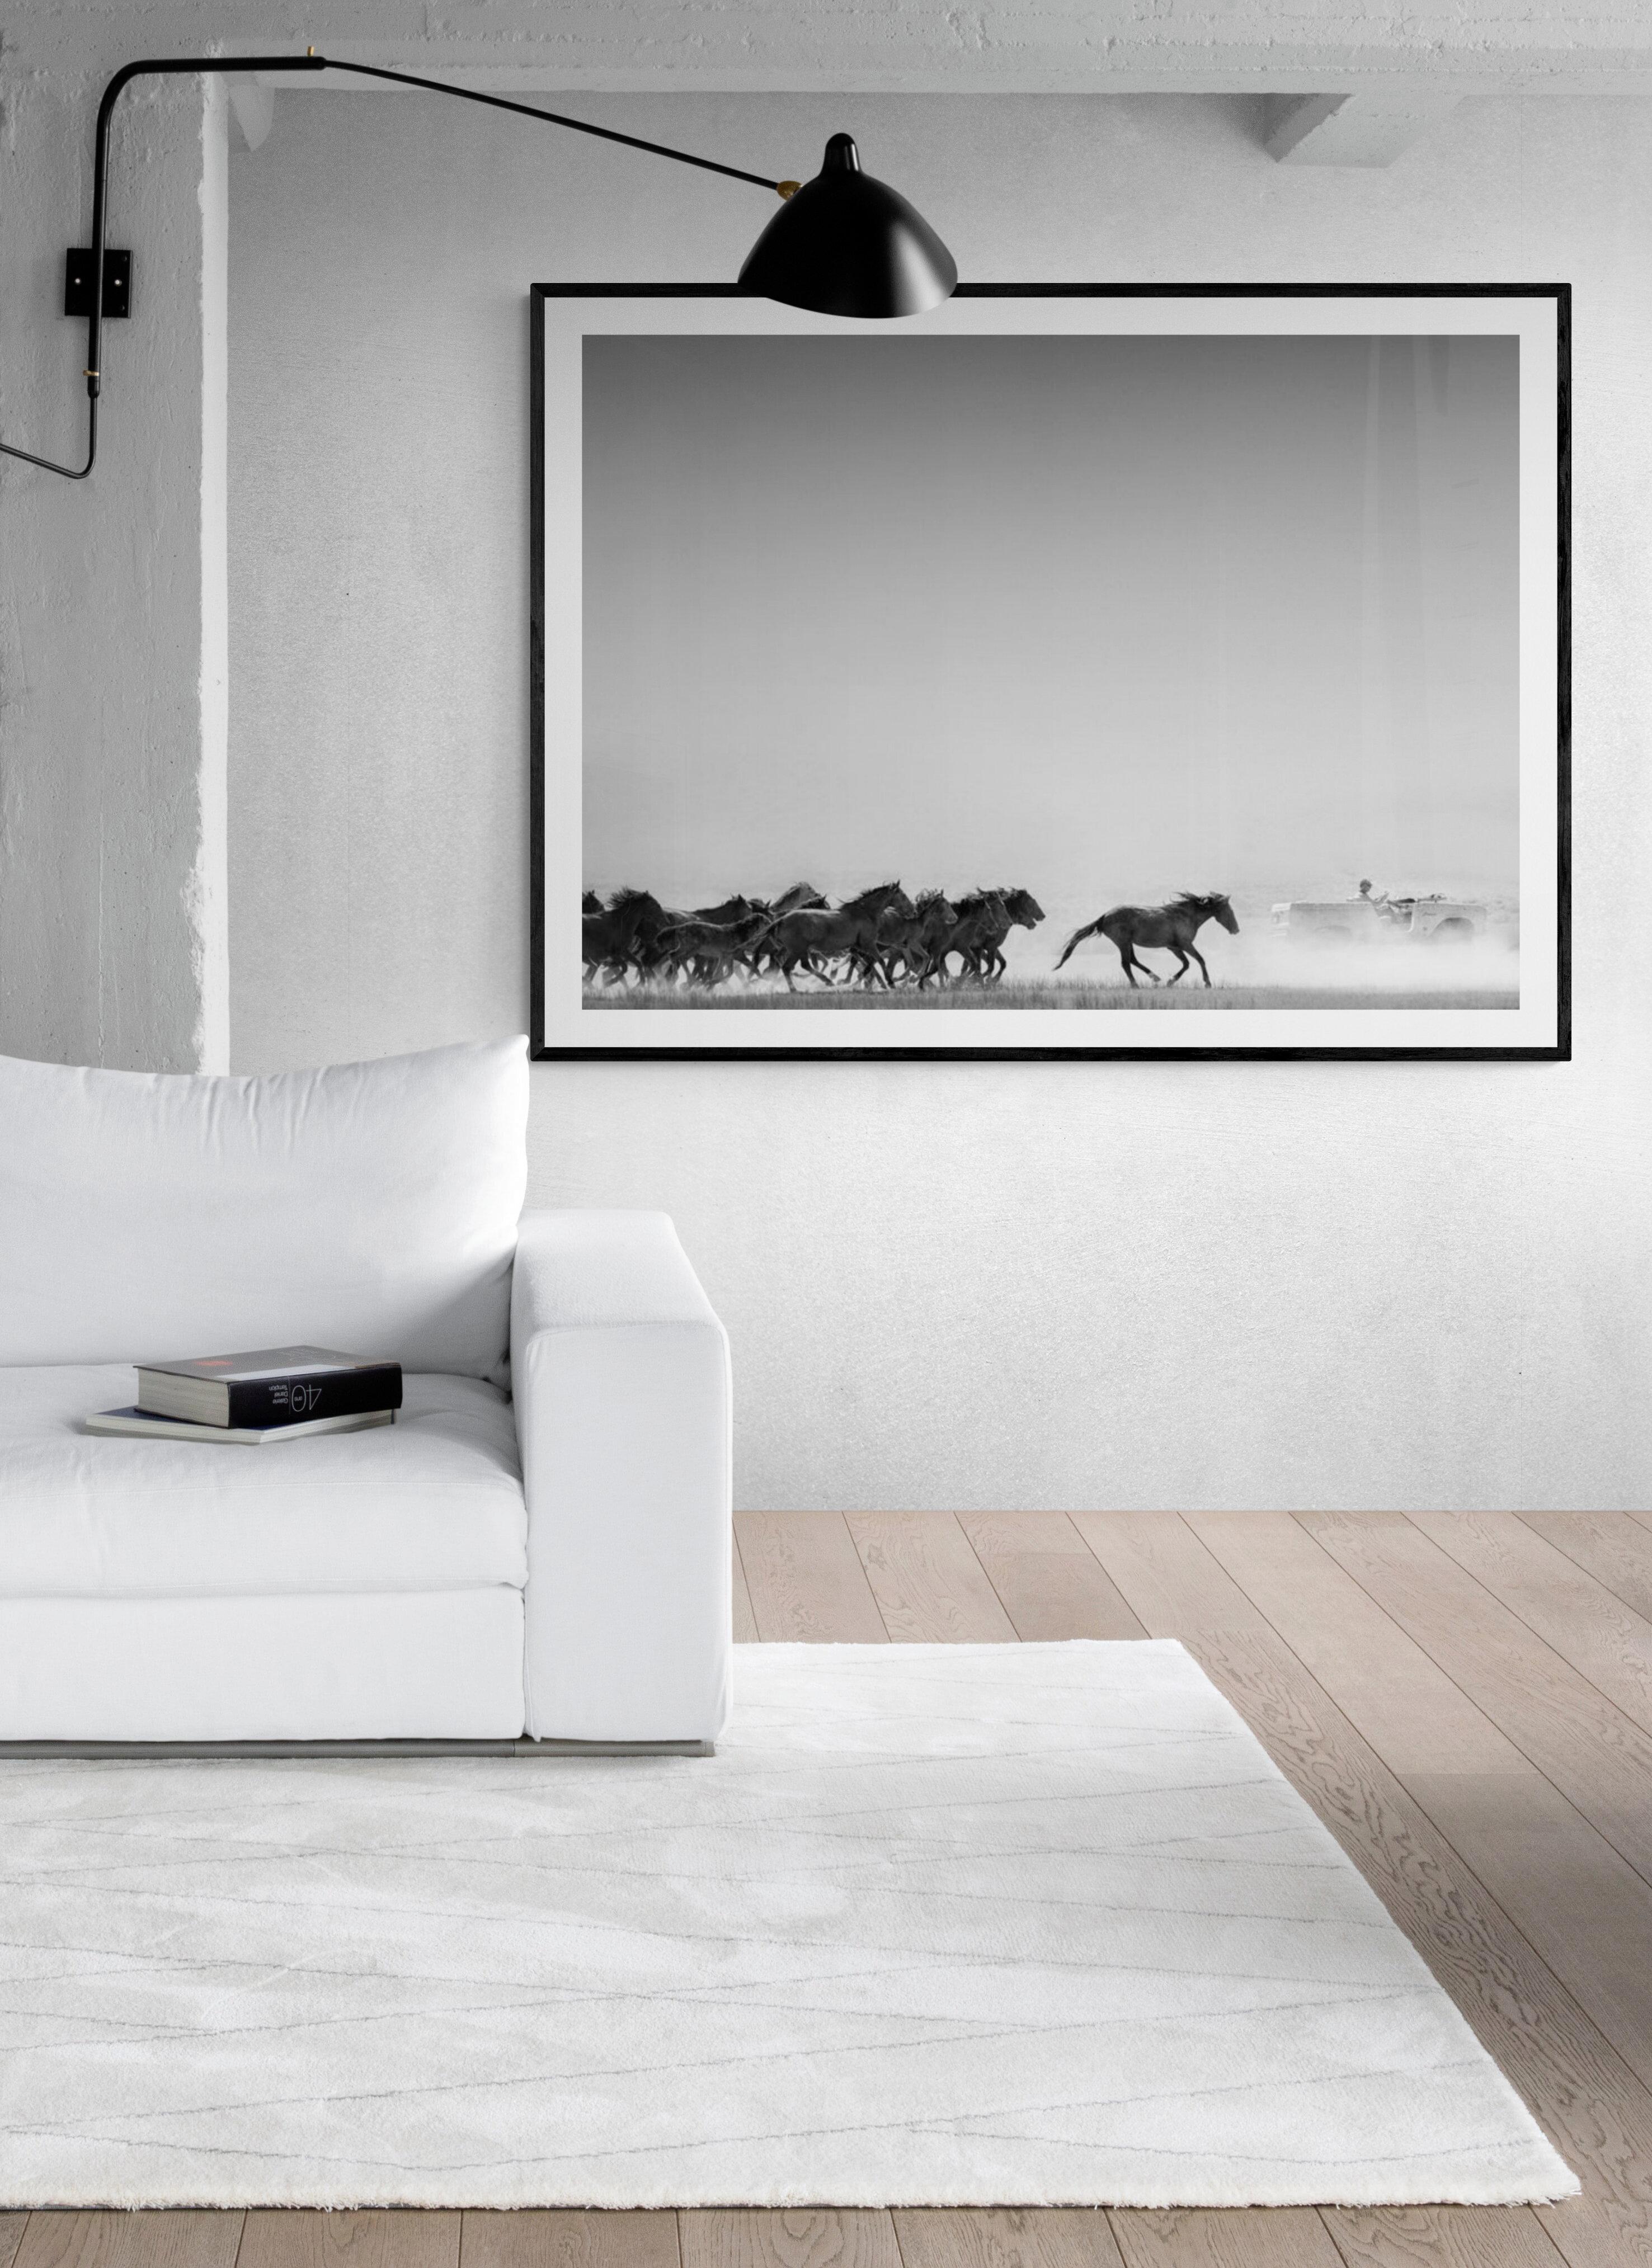 AMERICAN HORSE POWER 40x60 B&W Photography Wild Horses Mustangs FORD BRONCO  - Print by Shane Russeck